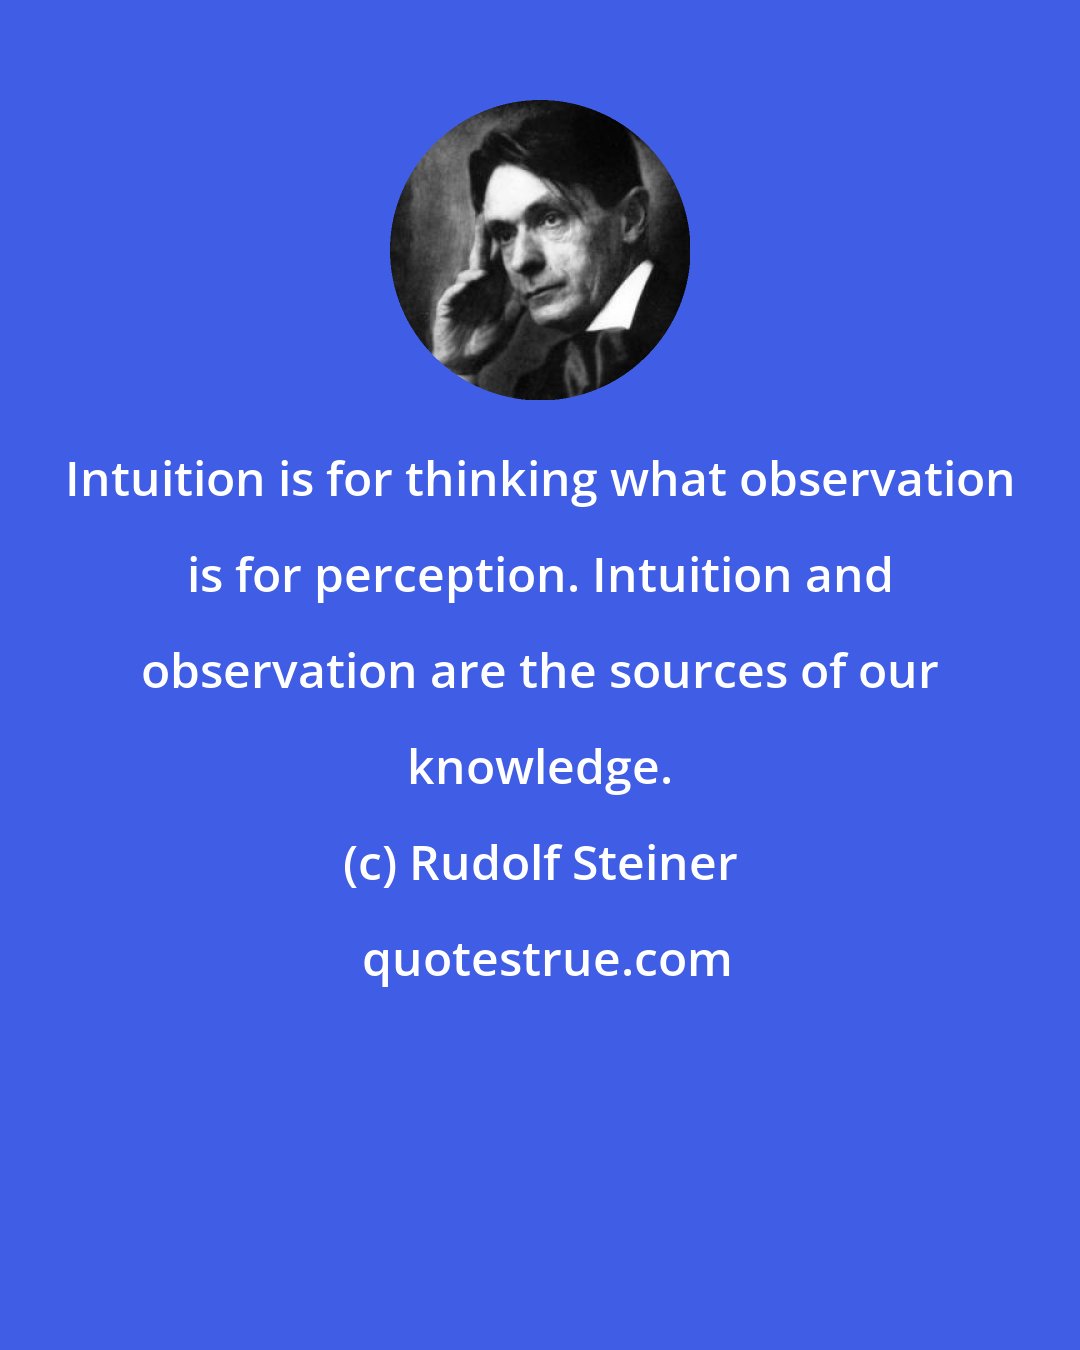 Rudolf Steiner: Intuition is for thinking what observation is for perception. Intuition and observation are the sources of our knowledge.